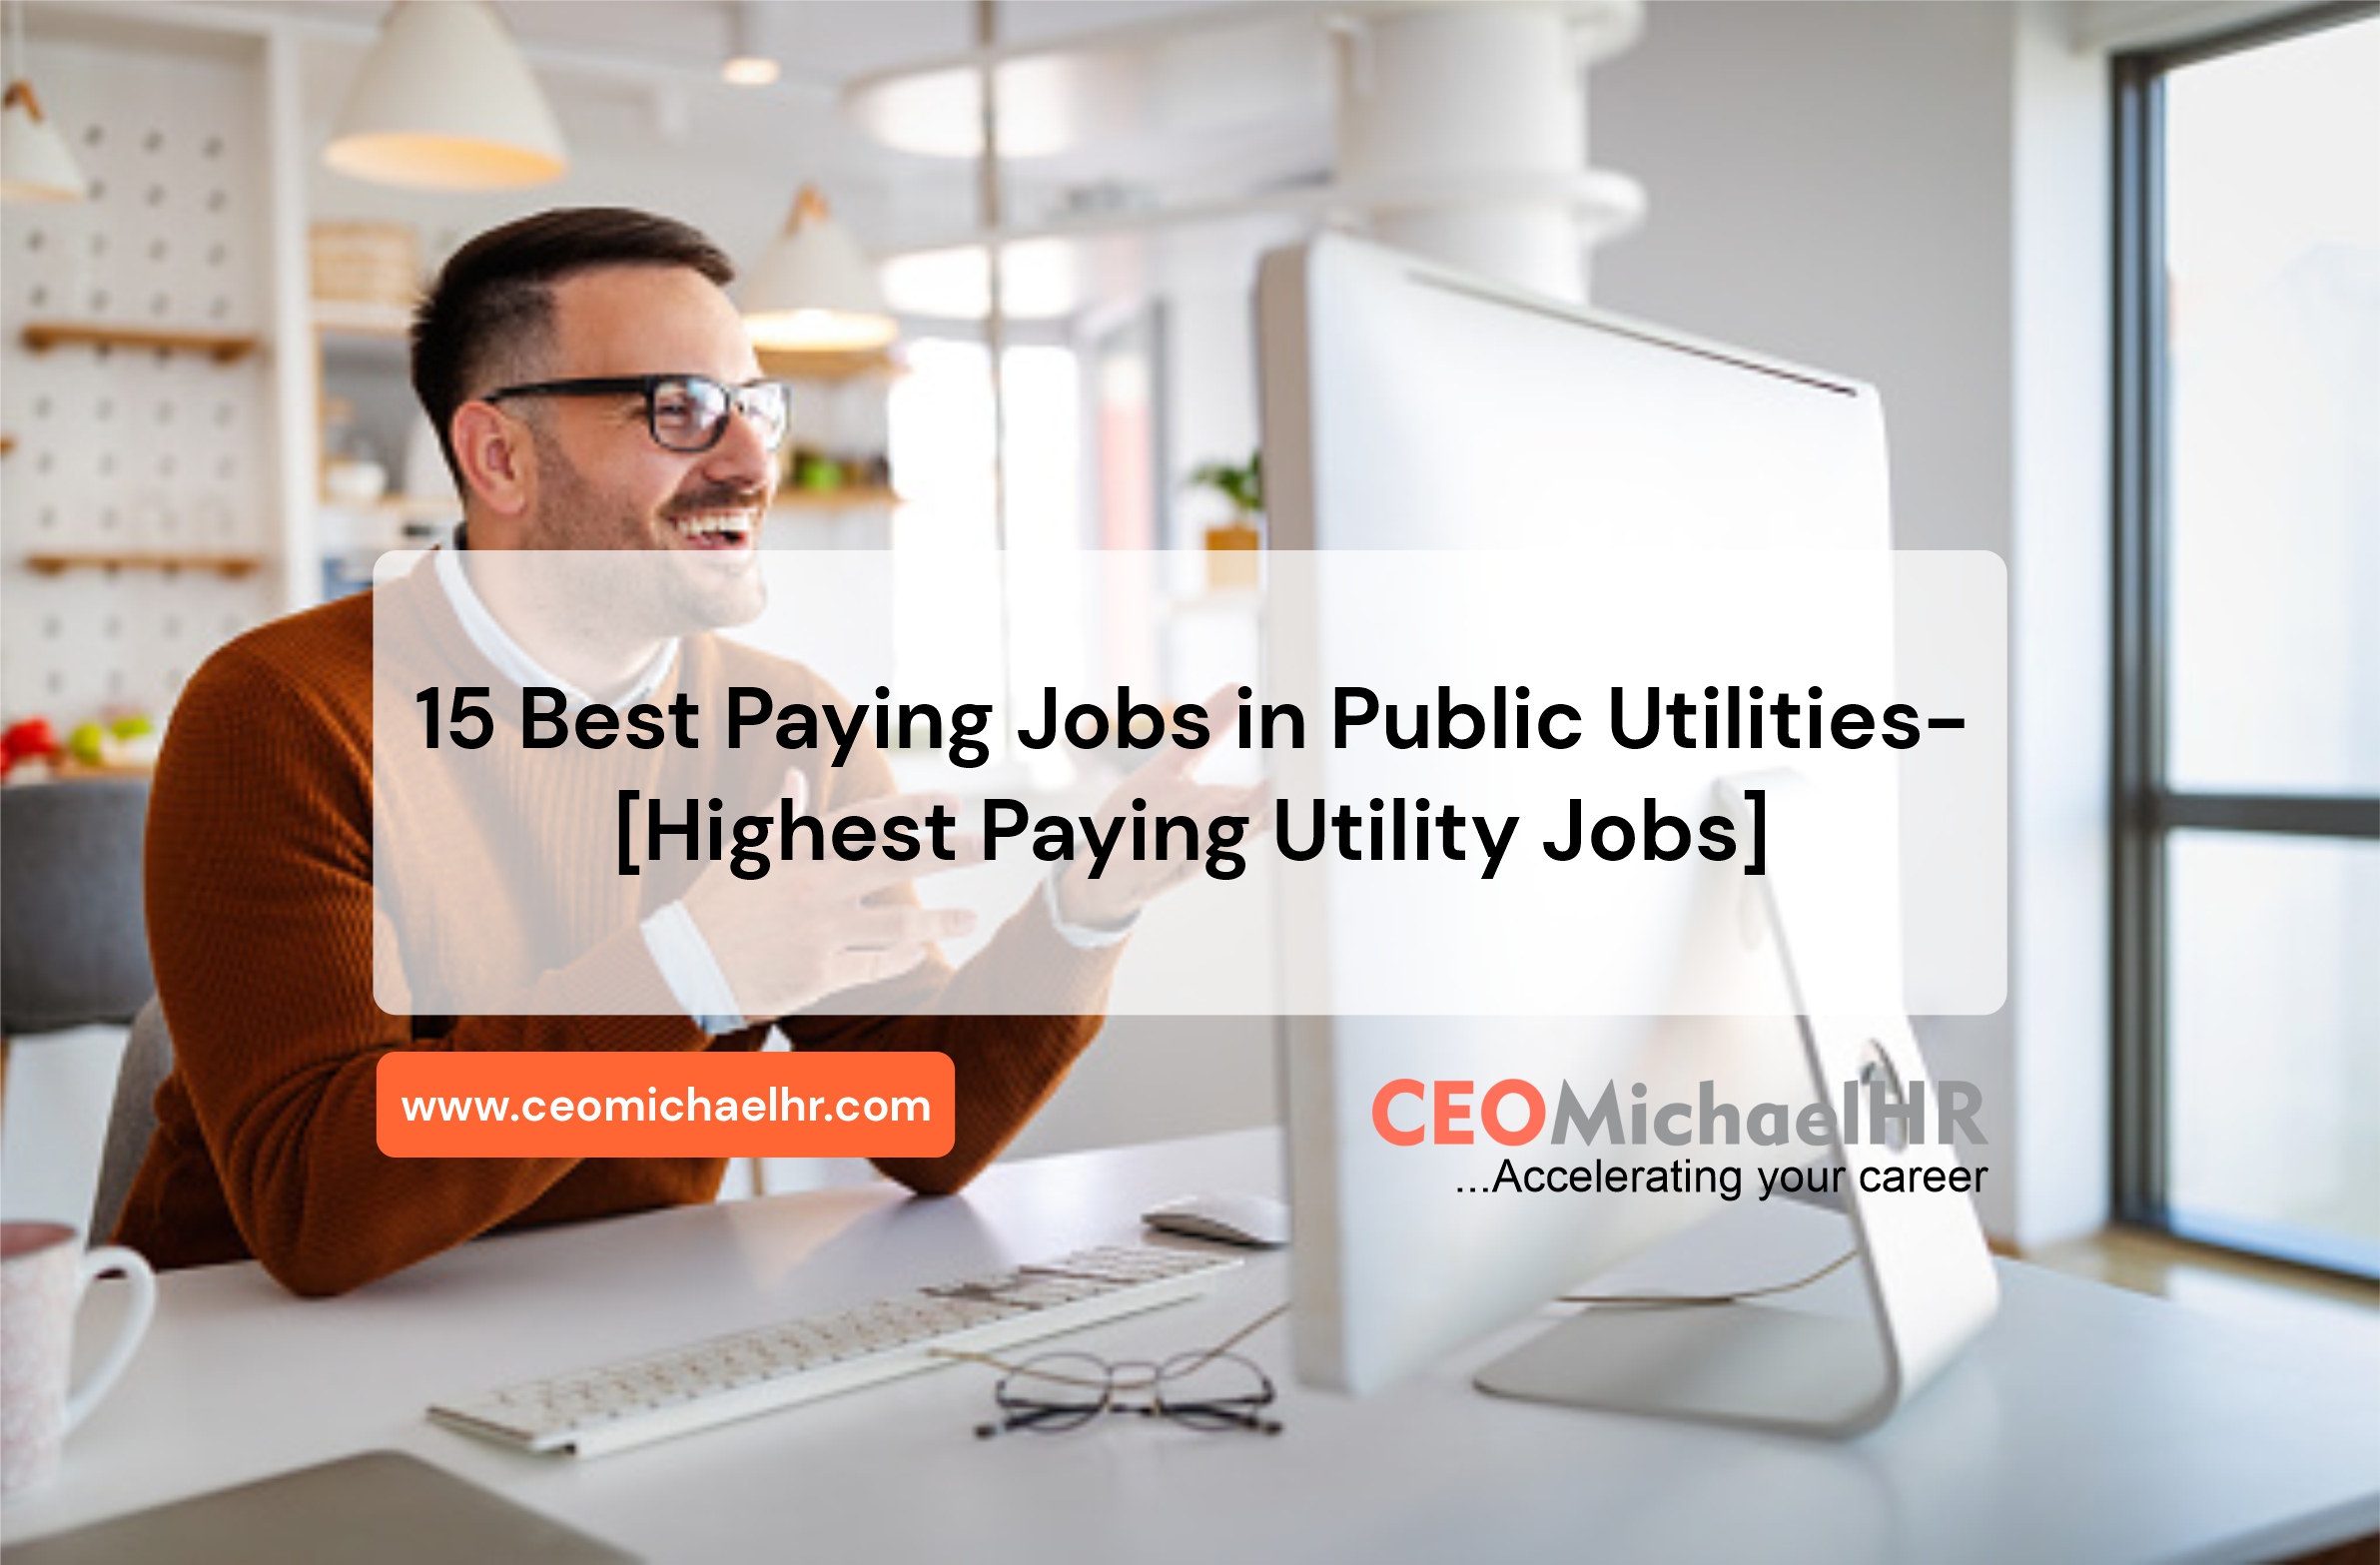 15 Best Paying Jobs in Public Utilities- [Highest Paying Utility Jobs]